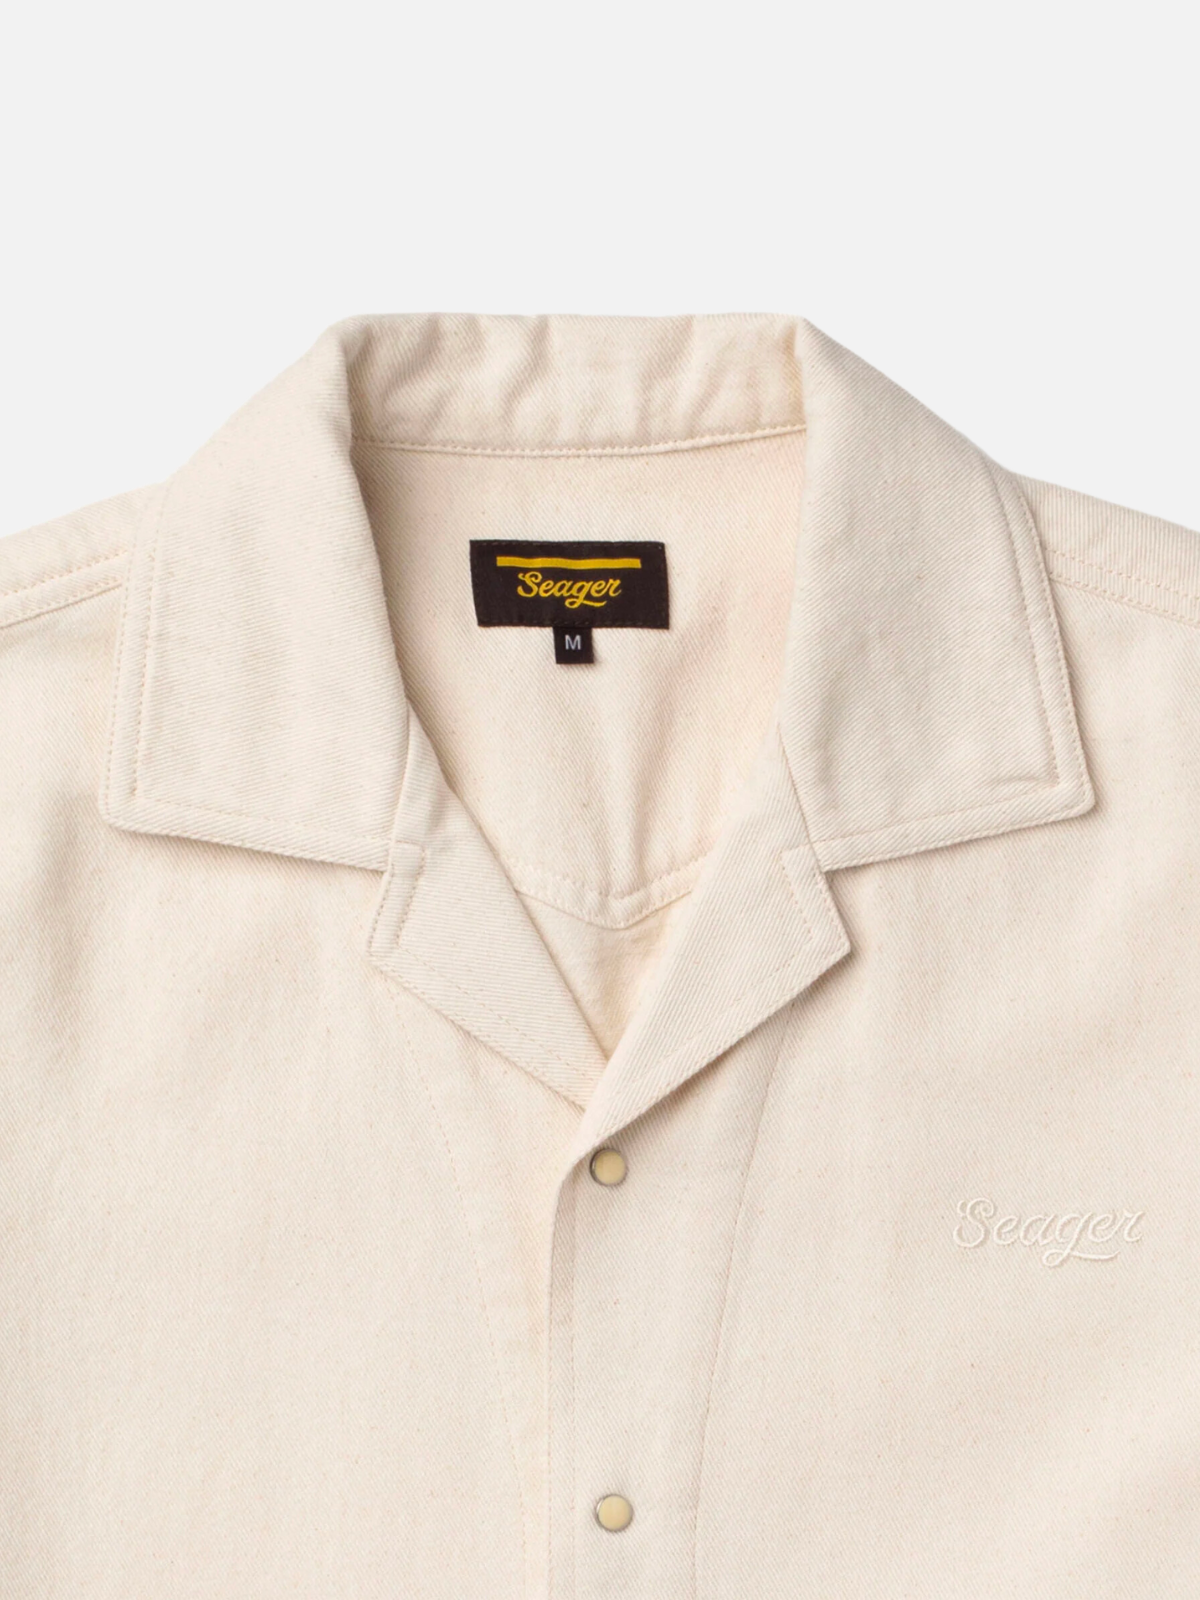 seager south paw whippersnapper cotton denim twill natural cream western pearl snap button down short sleeve kempt athens ga georgia men's clothing store